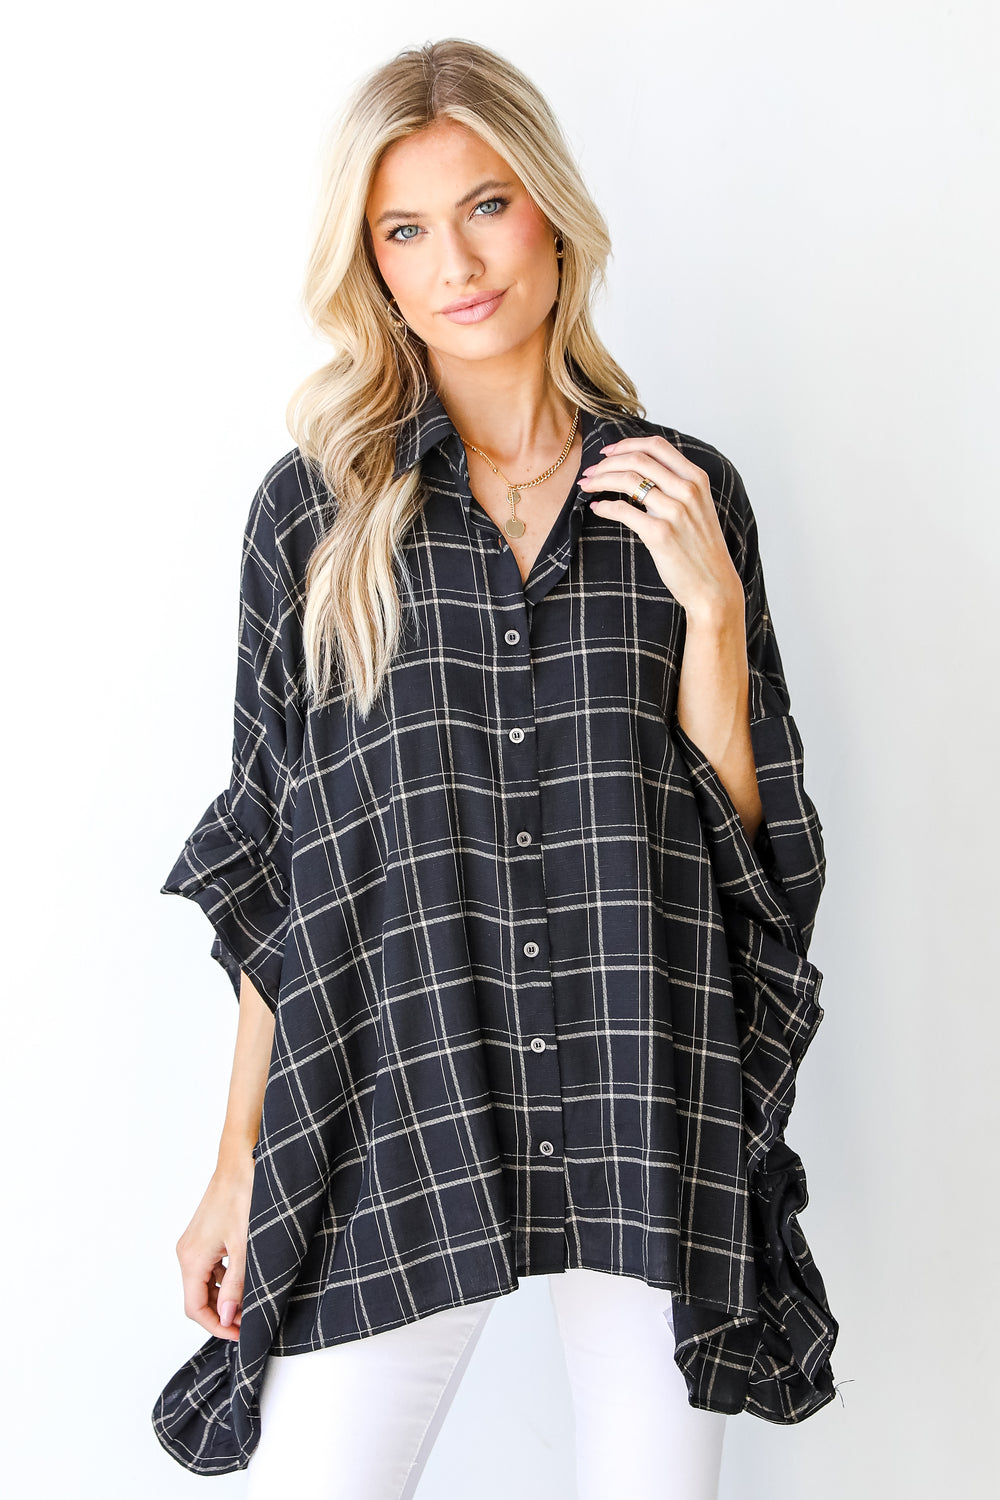 Plaid Oversized Ruffle Blouse from dress up